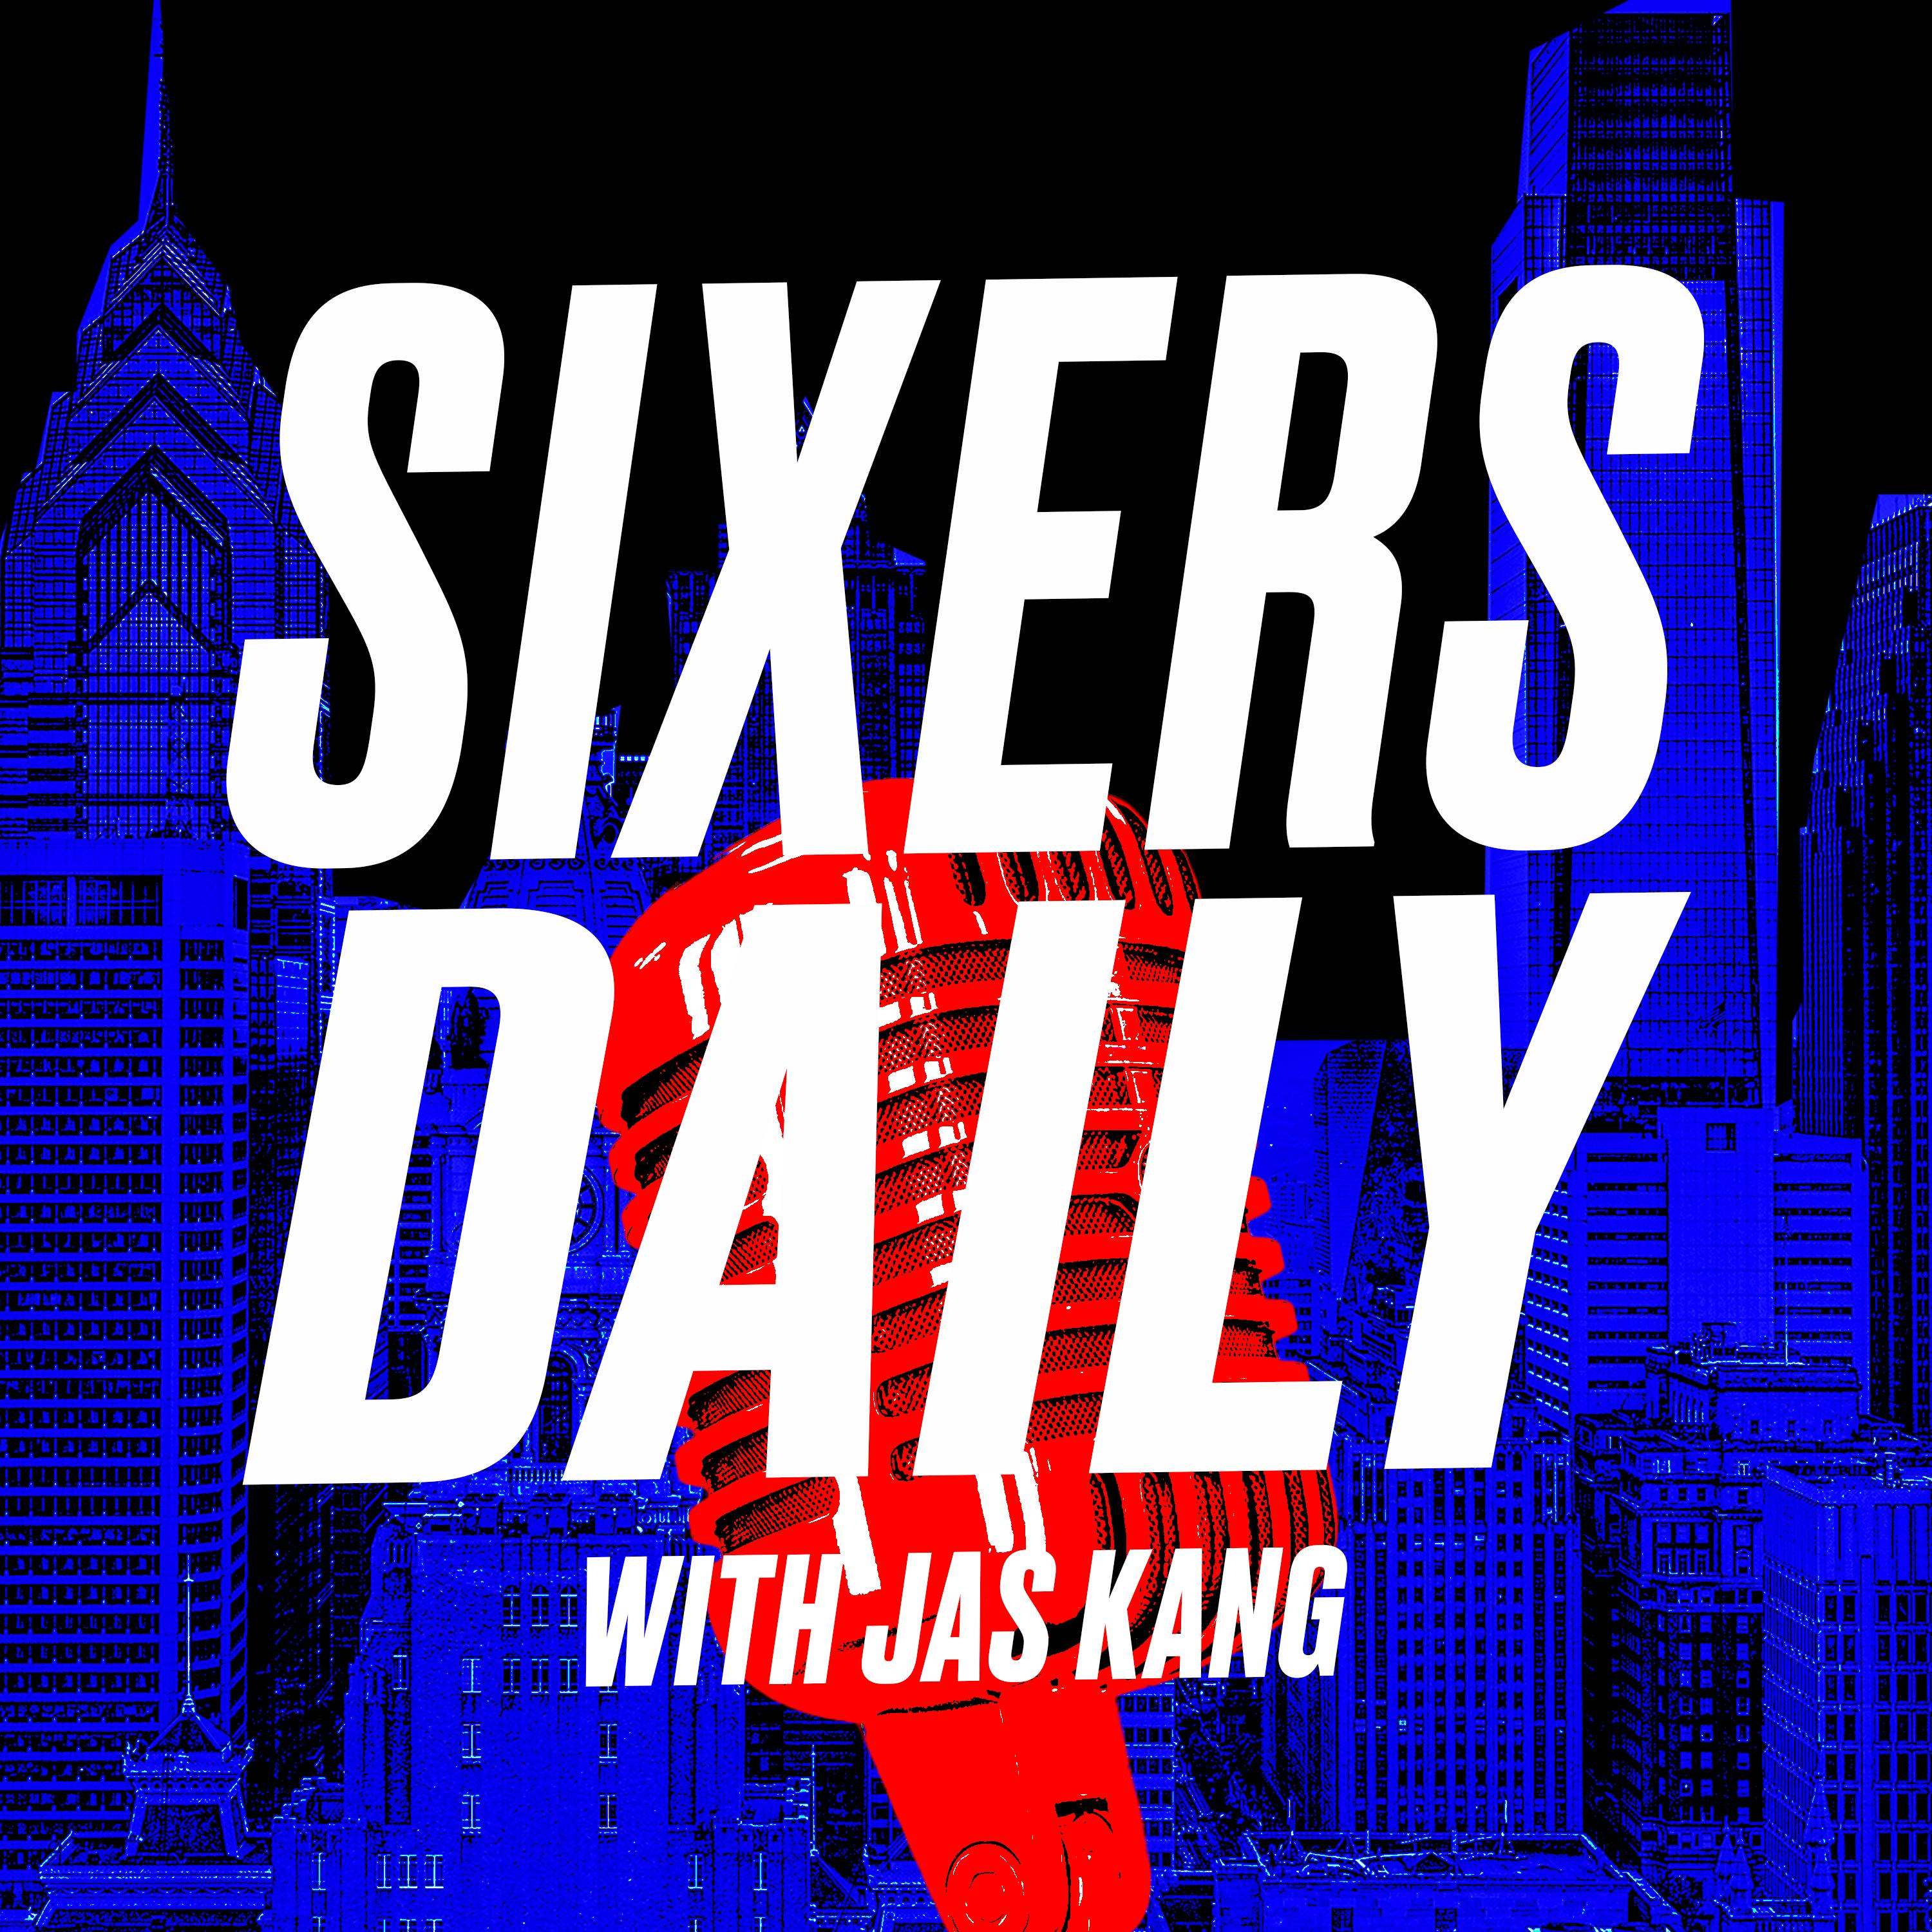 Sixers Daily with Jas Kang (Part 2) - Santa Clara men's basketball coach Herb Sendek on Jalen Williams' NBA potential and fit with the 76ers